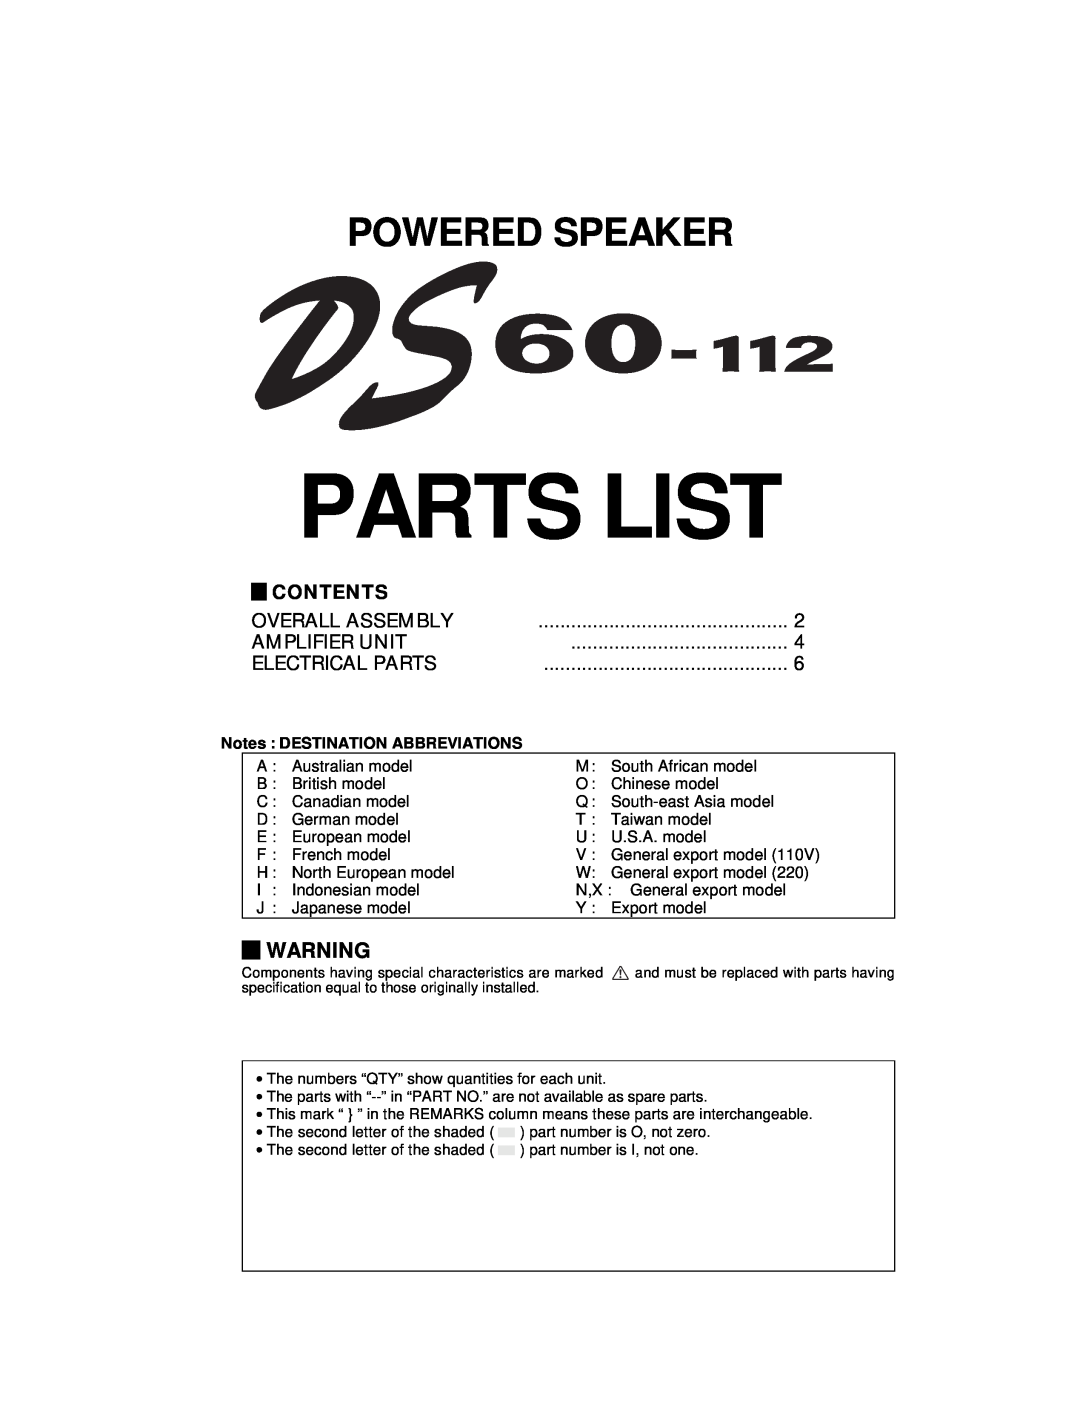 Yamaha DS60-112 service manual Parts List, Powered Speaker, Contents, Overall Assembly, Amplifier Unit, Electrical Parts 